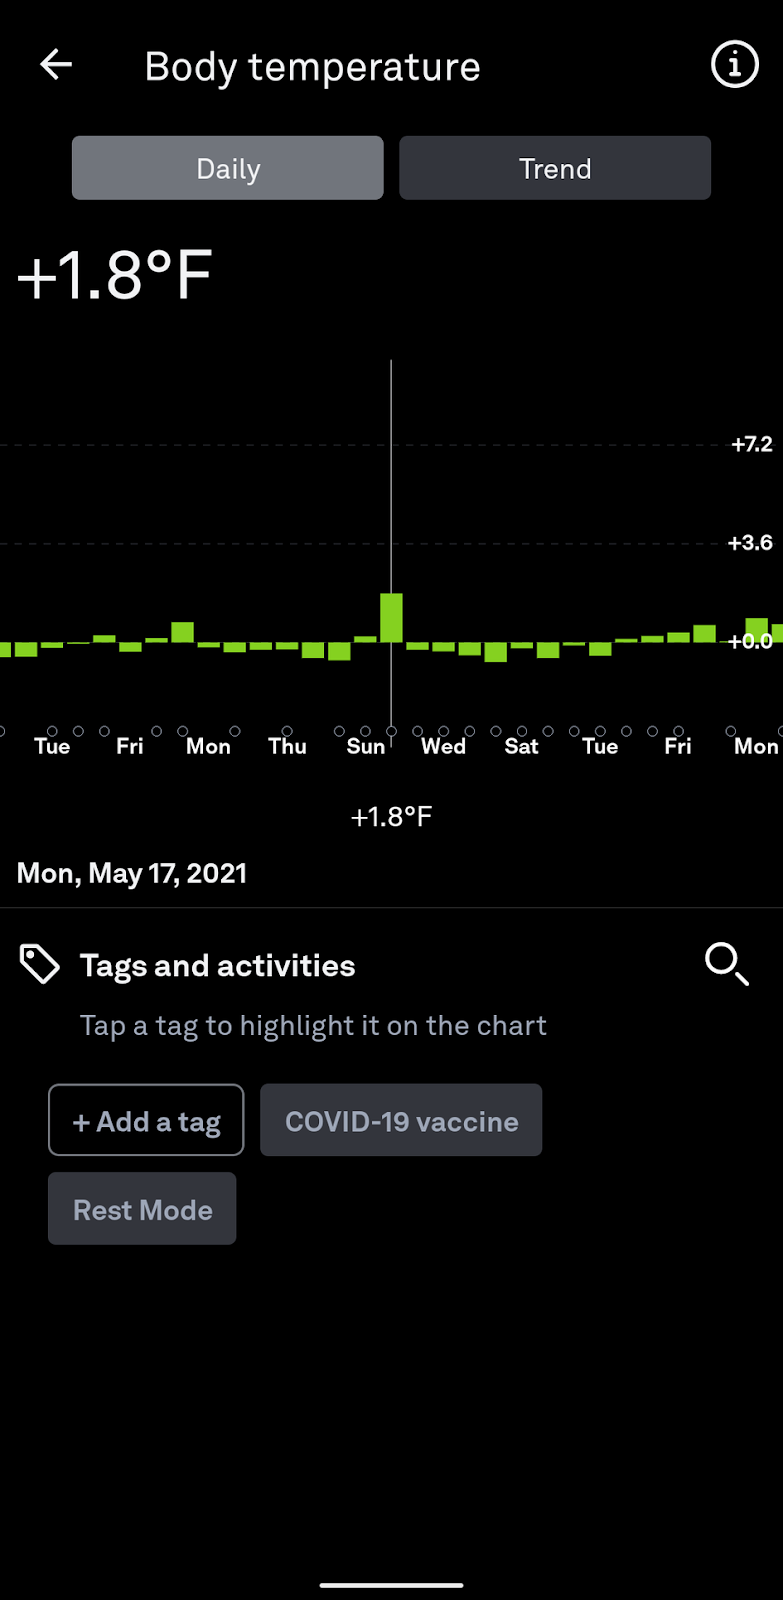 Body temperature spike after vaccine